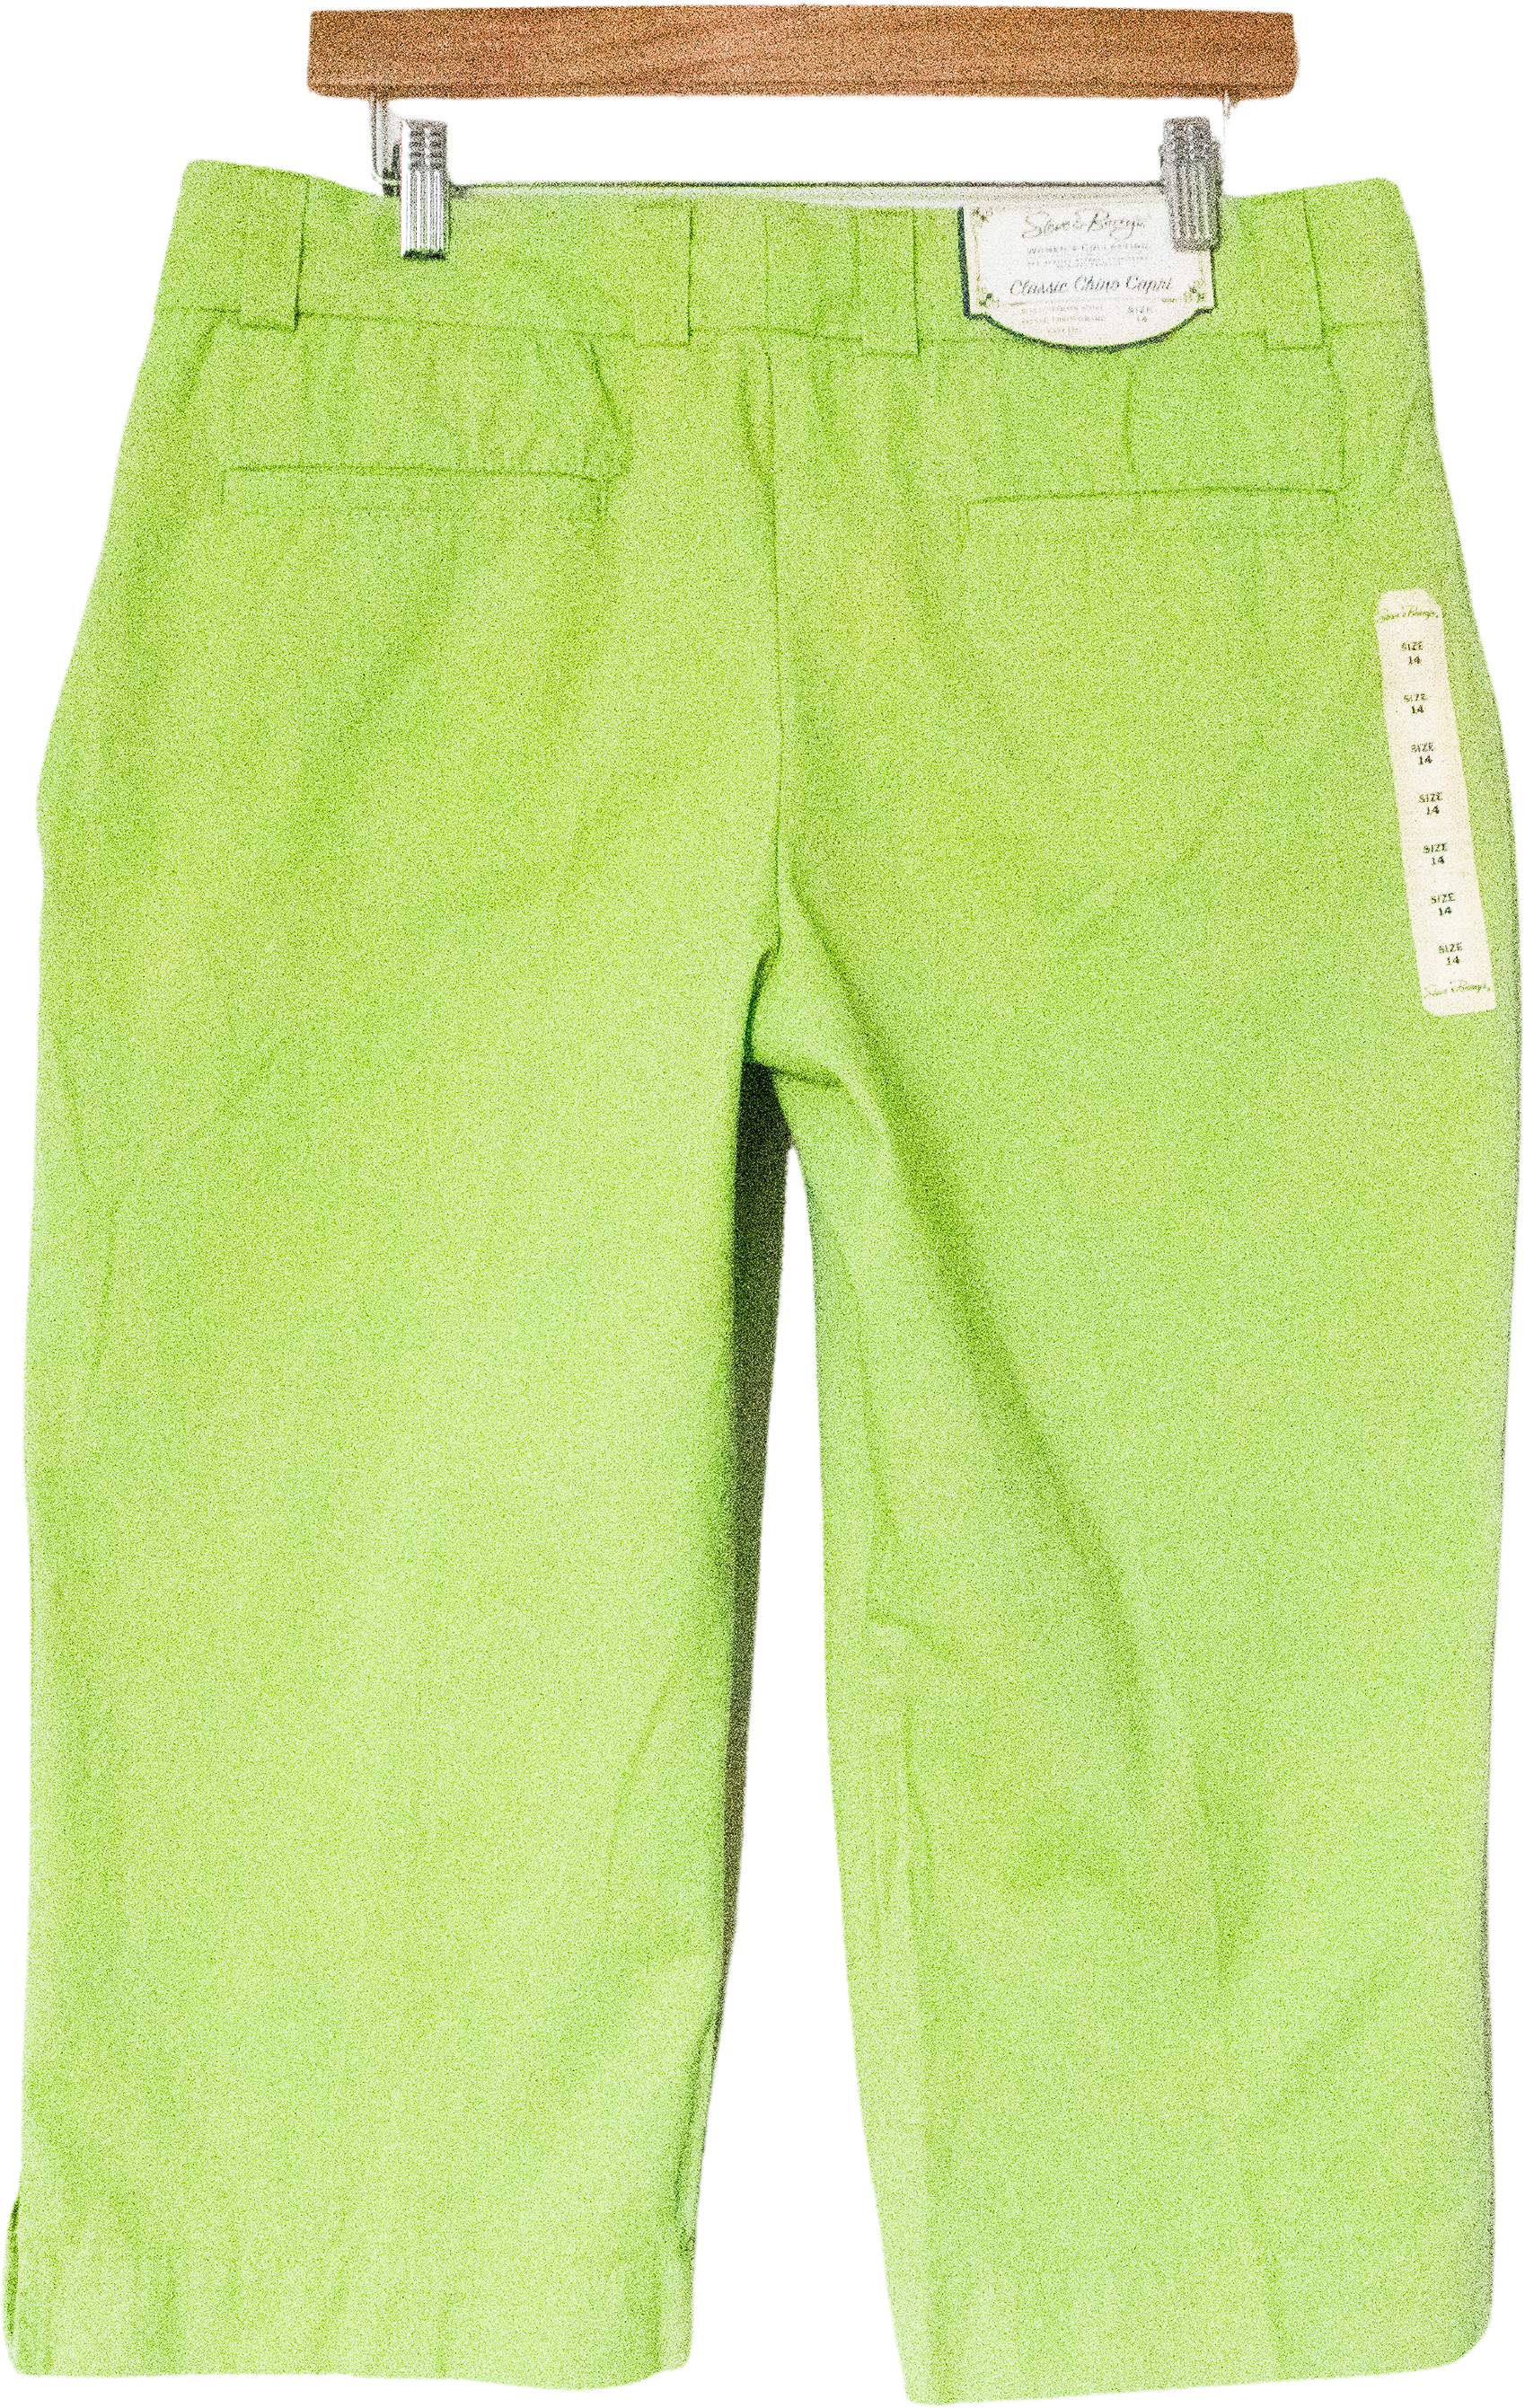 1950's Style Lime Green Cotton Capri / Pedal Pushers / Clam Digger/ Pants 